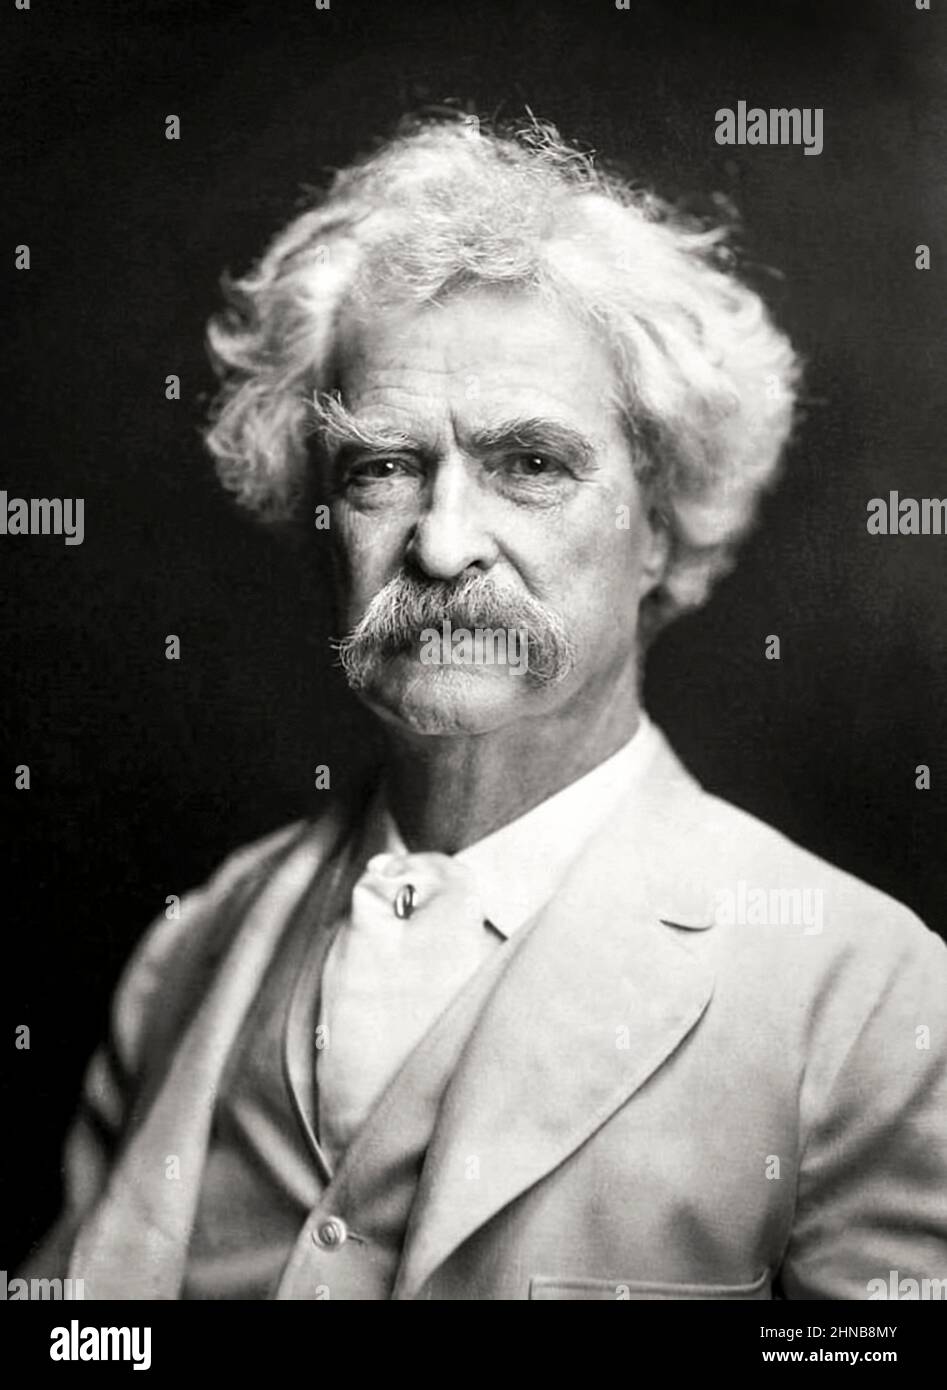 Mark Twain (1835-1910), The Father of American Literature whose works include The Adventures of Tom Sawyer and the Adventures of Huckleberry Finn. Photograph by A.F. Bradley taken in New York in 1907. Stock Photo